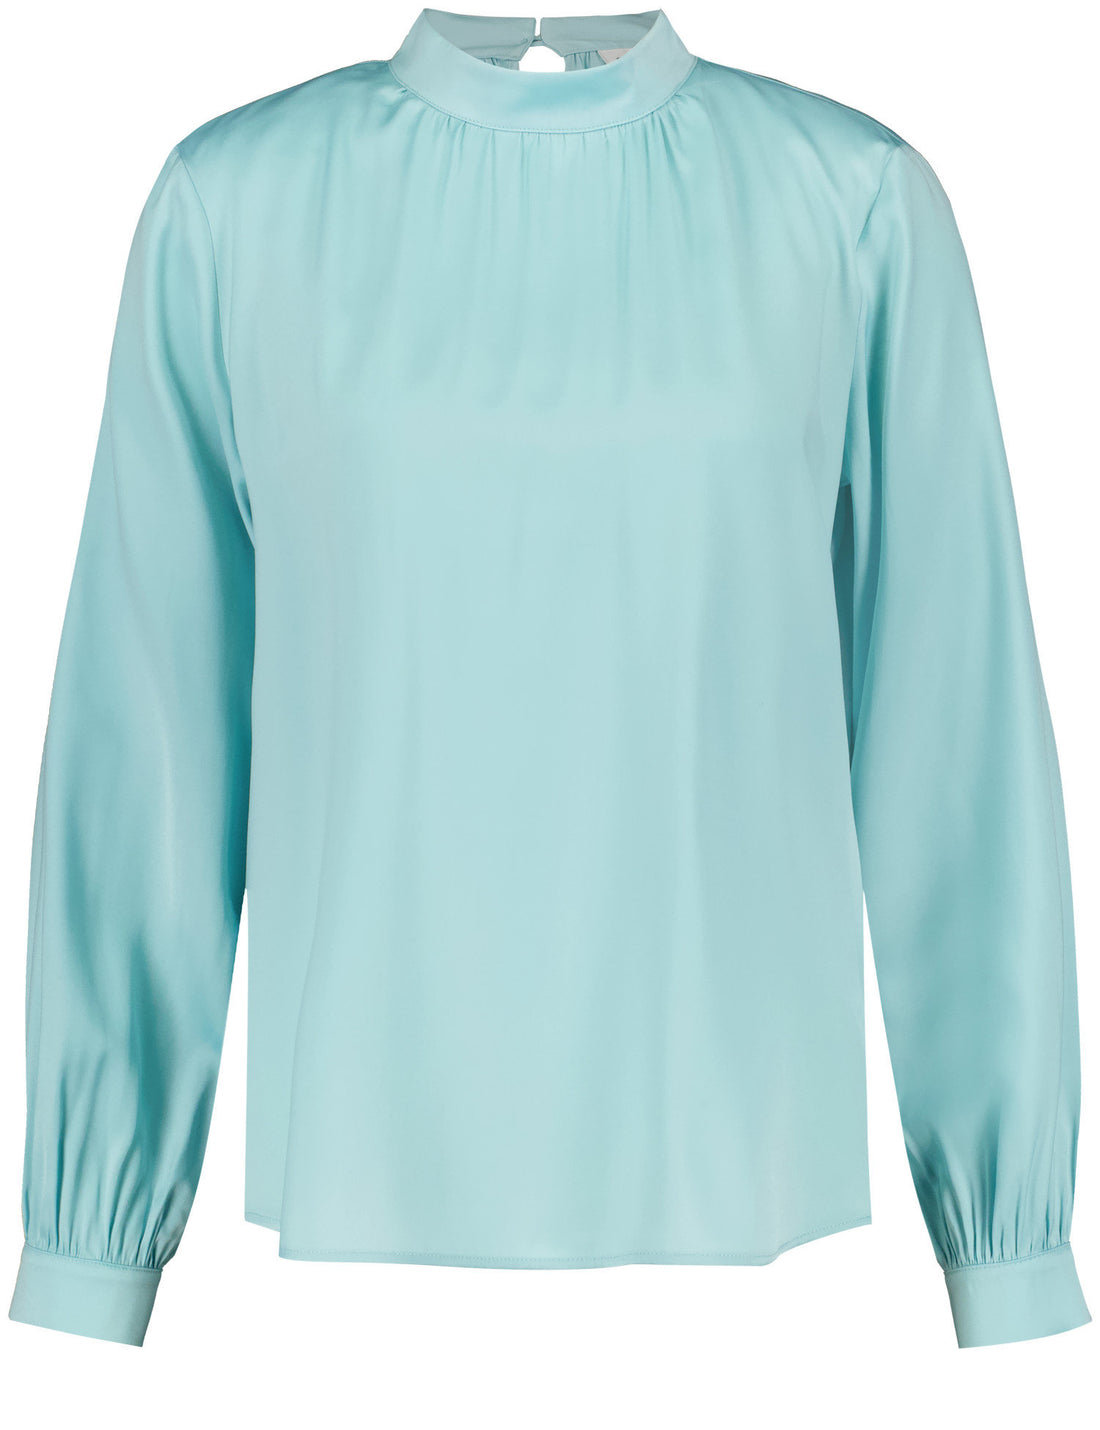 Flowing Blouse With A Stand-Up Collar_360067-31460_80938_02